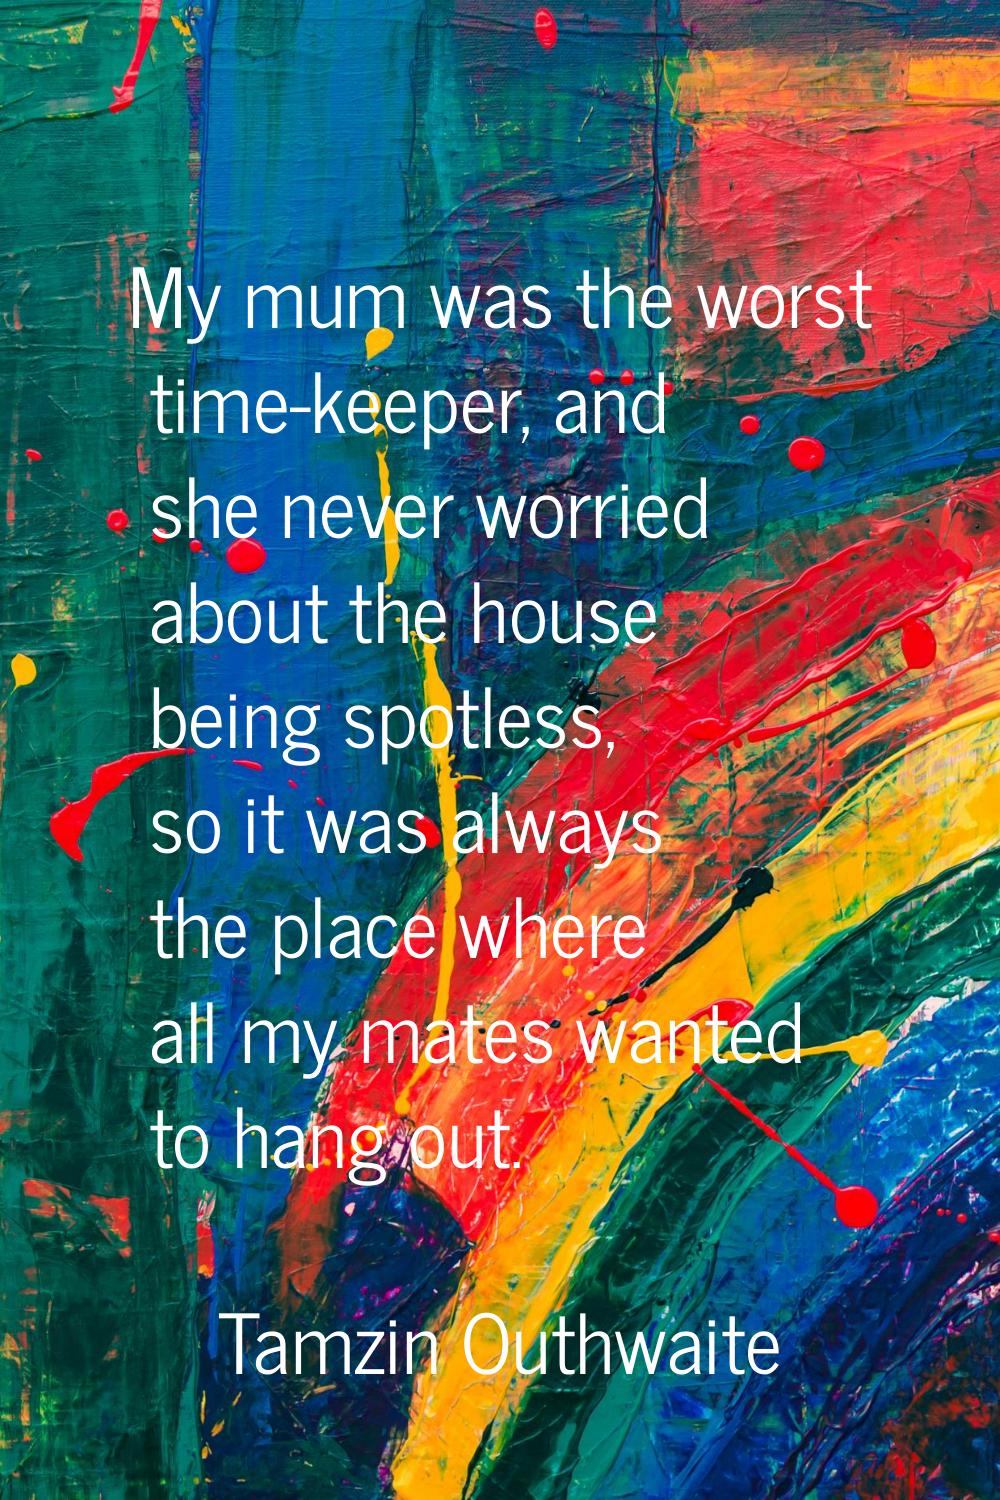 My mum was the worst time-keeper, and she never worried about the house being spotless, so it was a